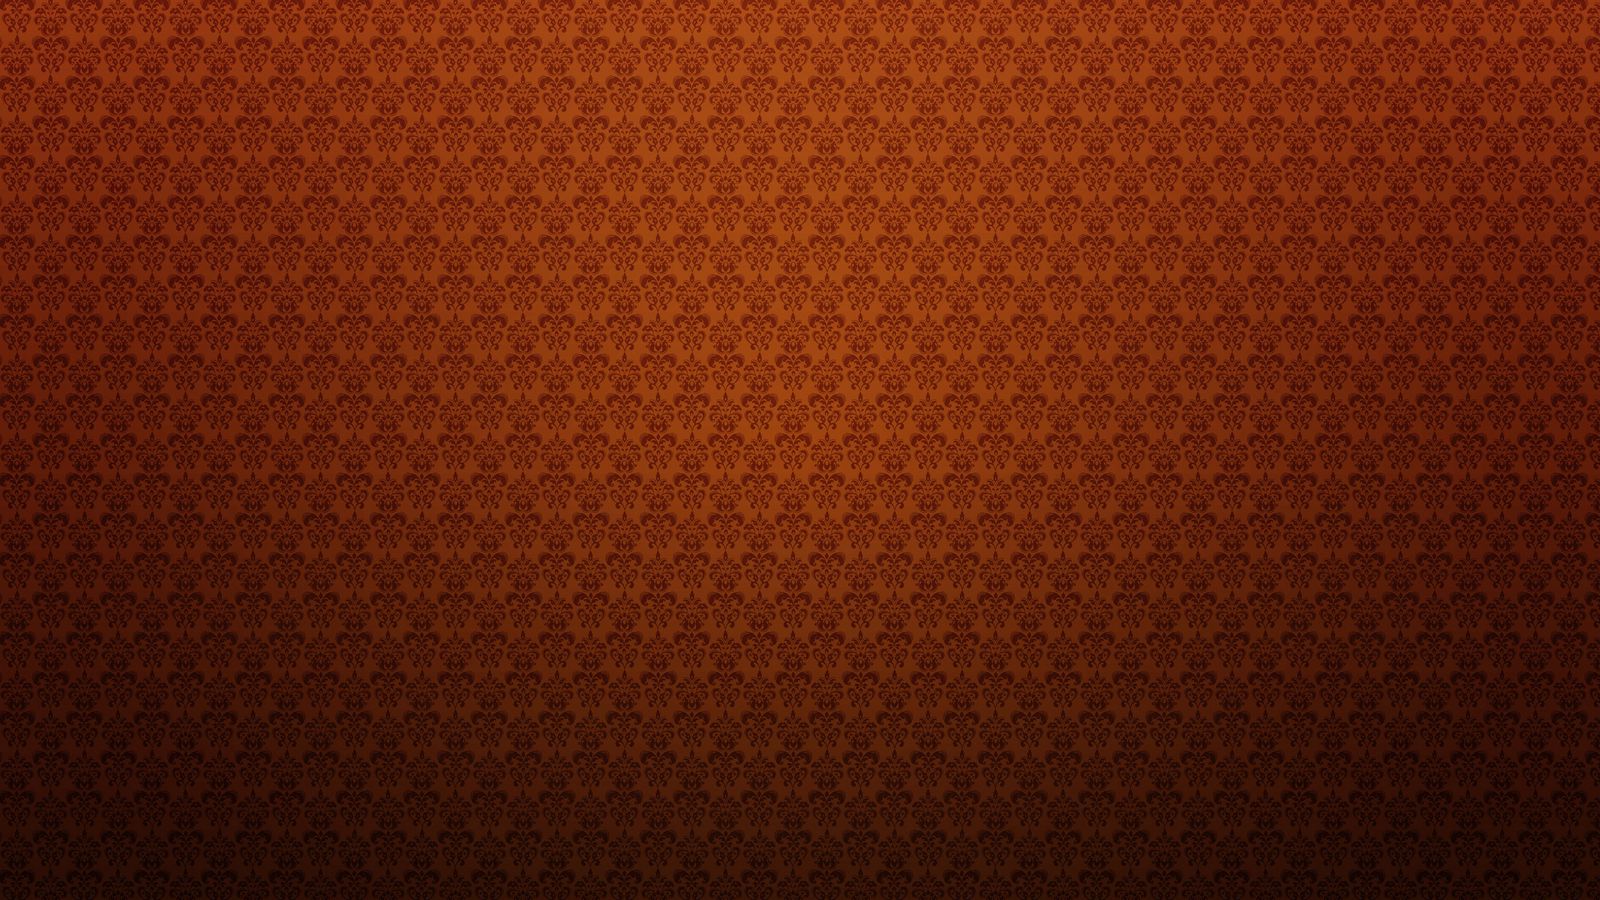 Download wallpaper 1600x900 patterns, light, colorful, texture ...